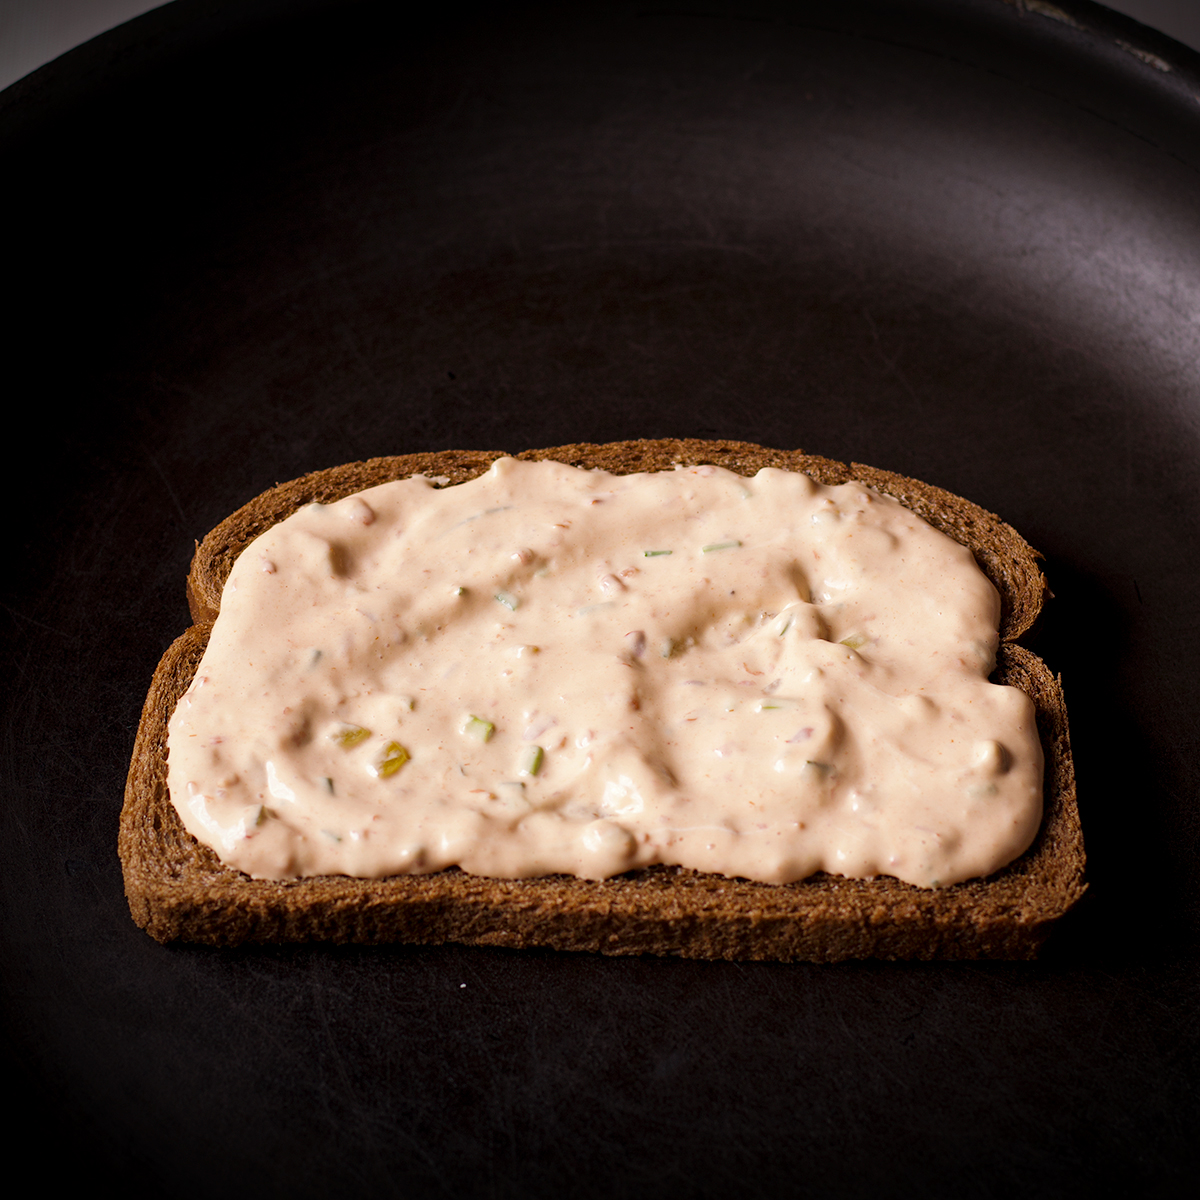 A piece of Rye bread spread with Russian dressing in a skillet.